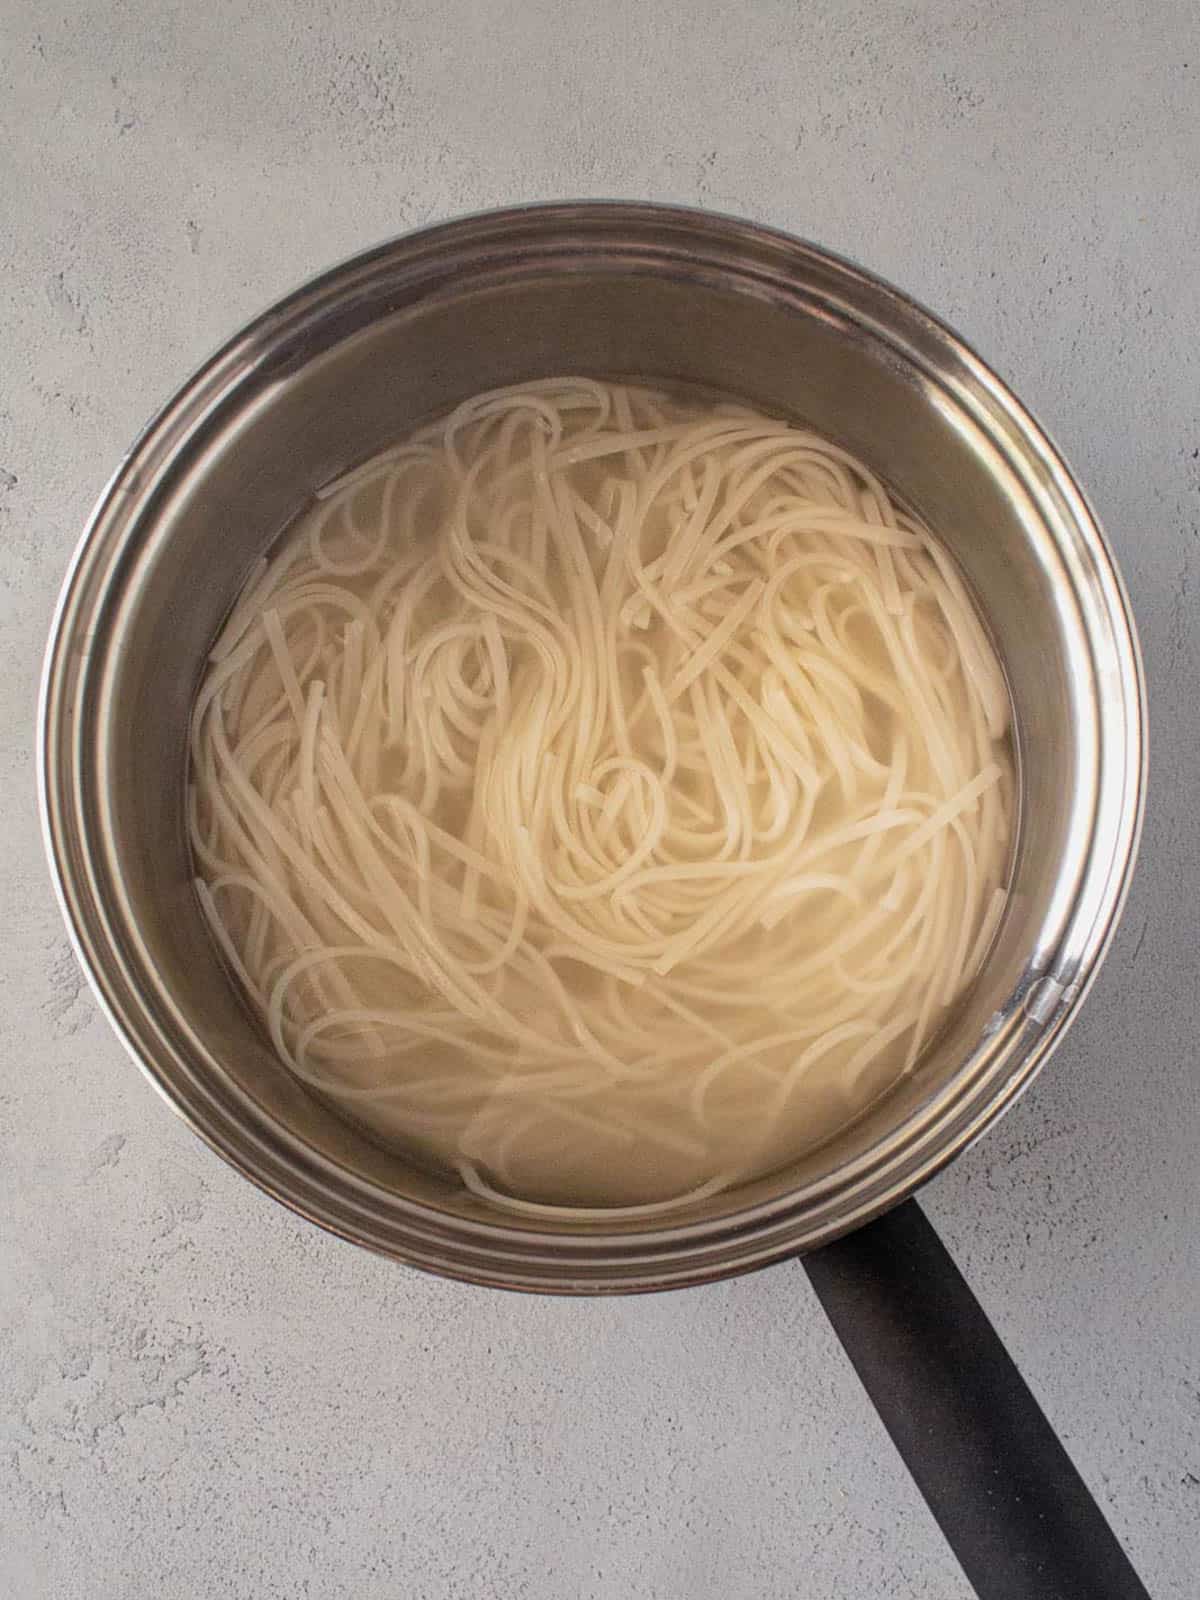 Rice noodles soaking in a pot of water.